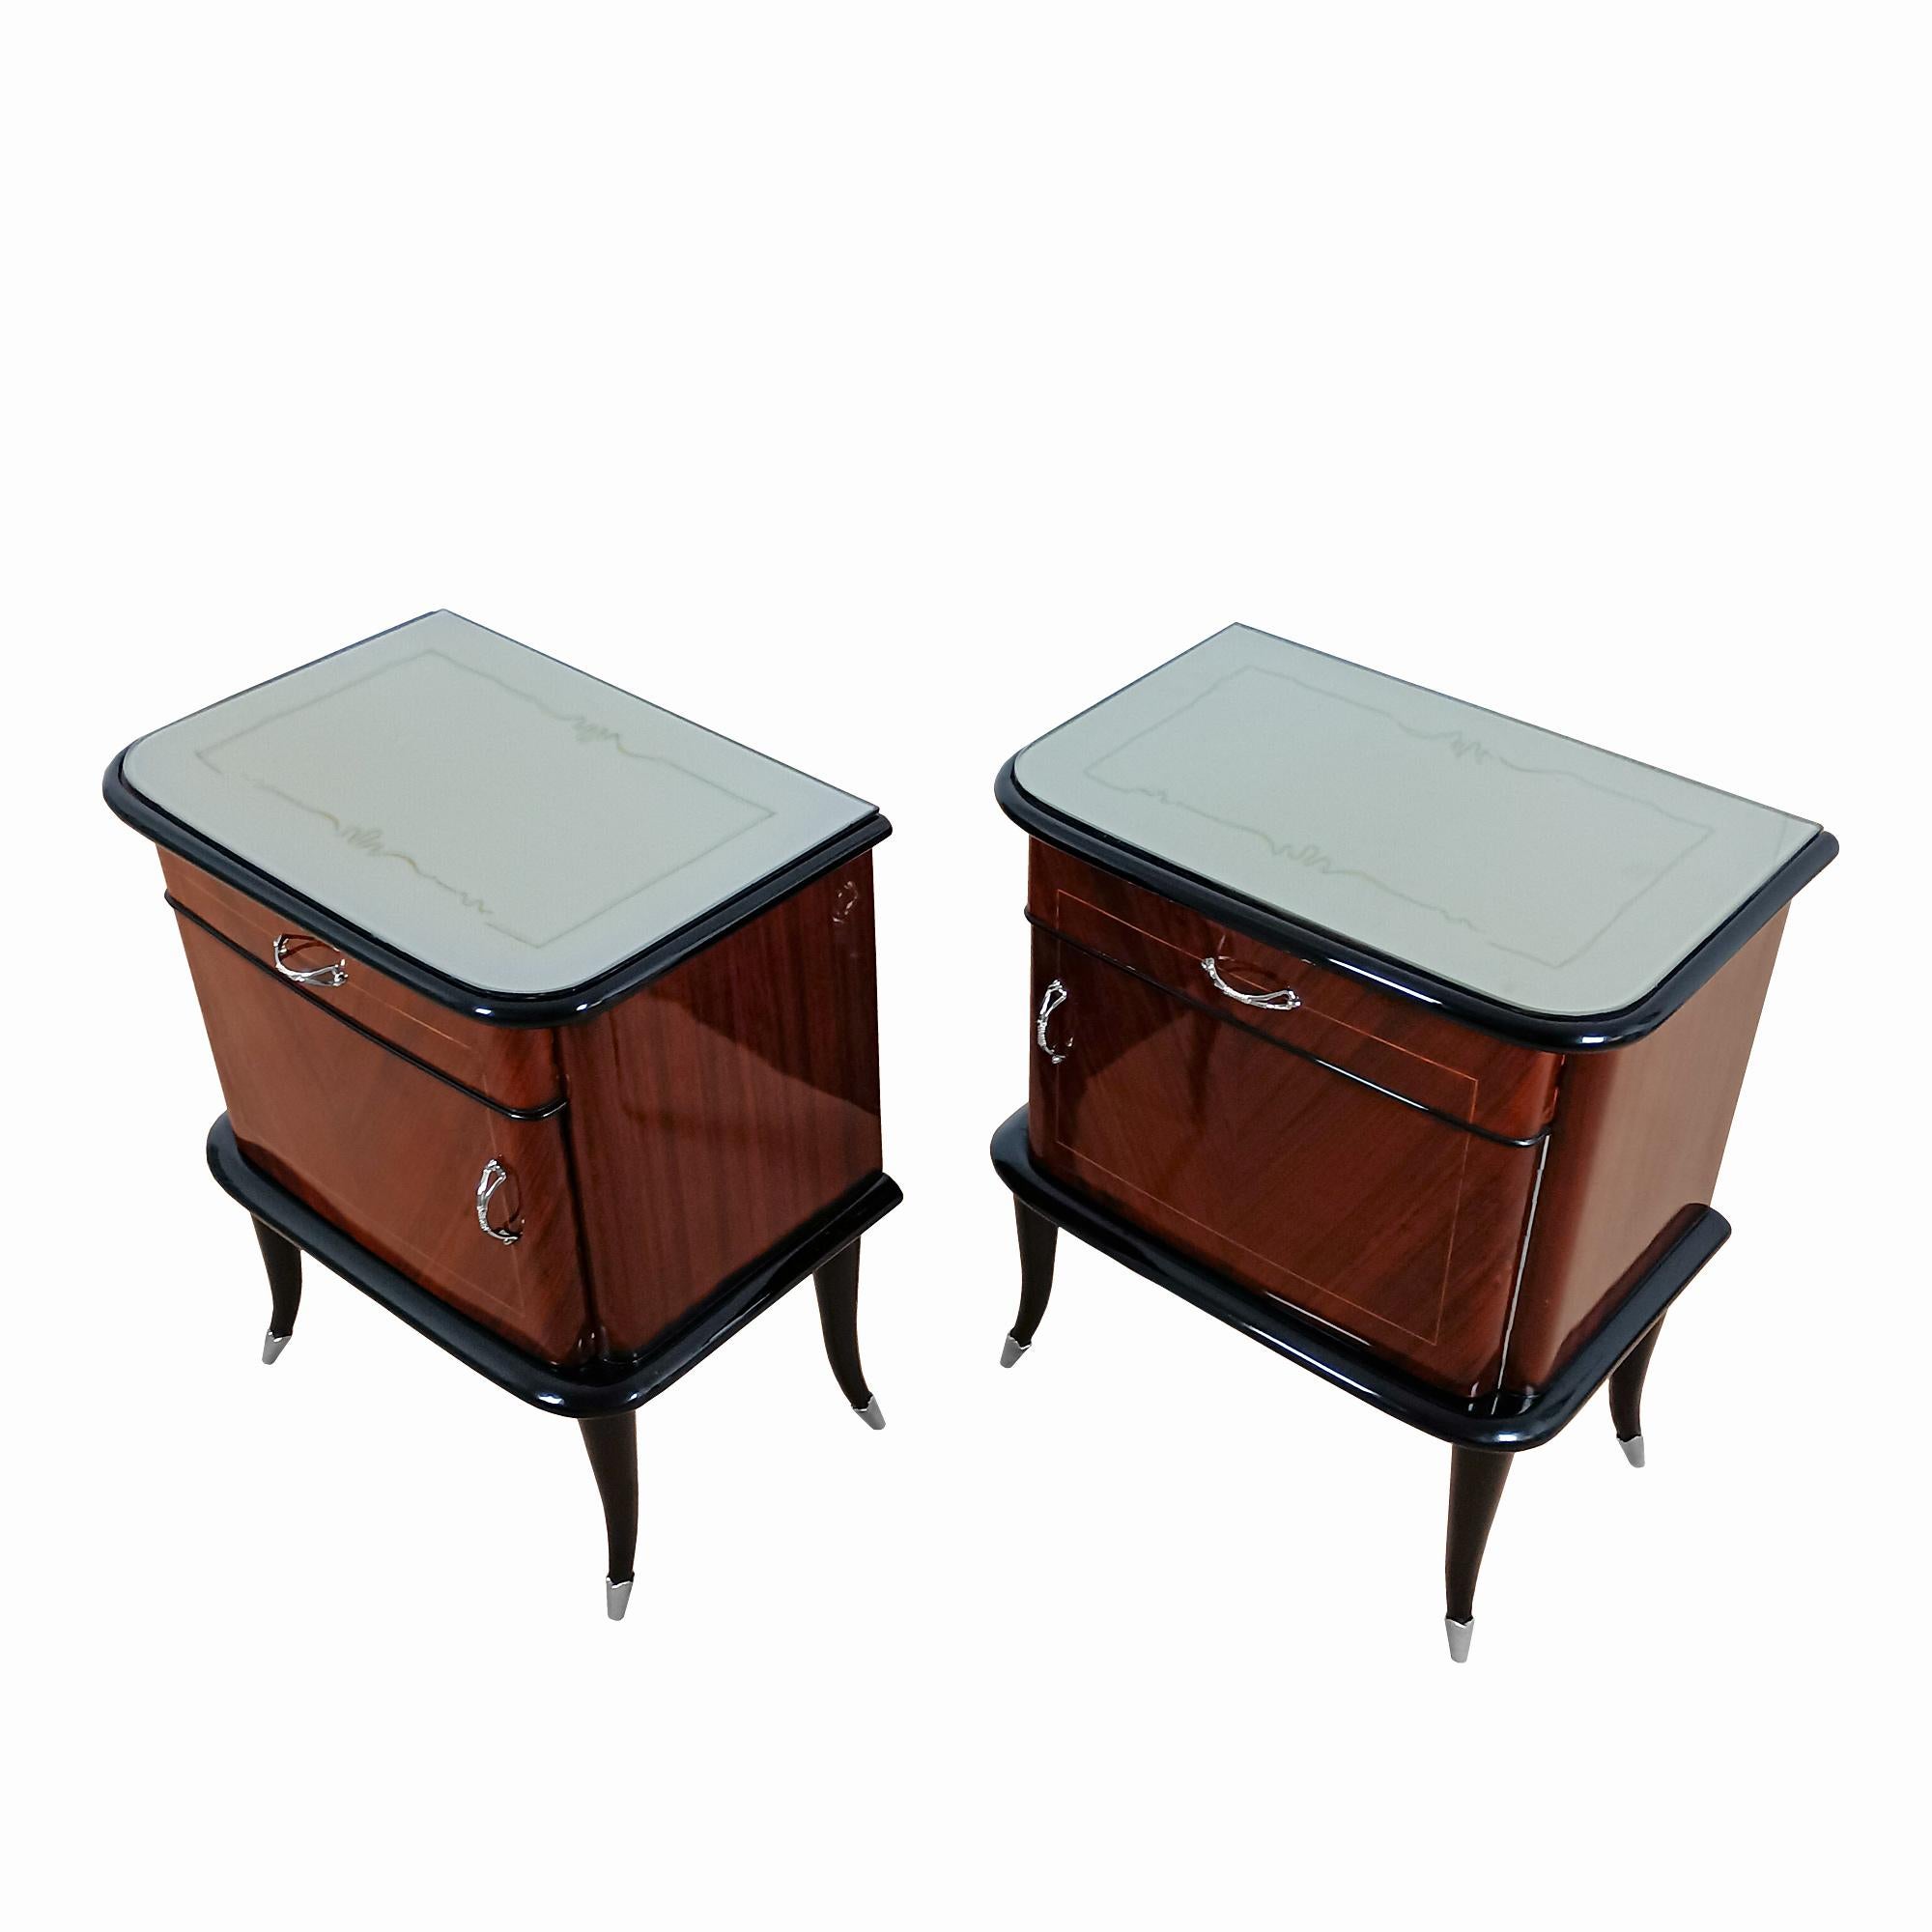 Pair of nightstands in blackened beech and rosewood veneer with lemon tree mouldings, nickel-plated brass handles and feet, and sapele interior. Silver glass top with gold trim. French polished.

Italy c. 1940

 